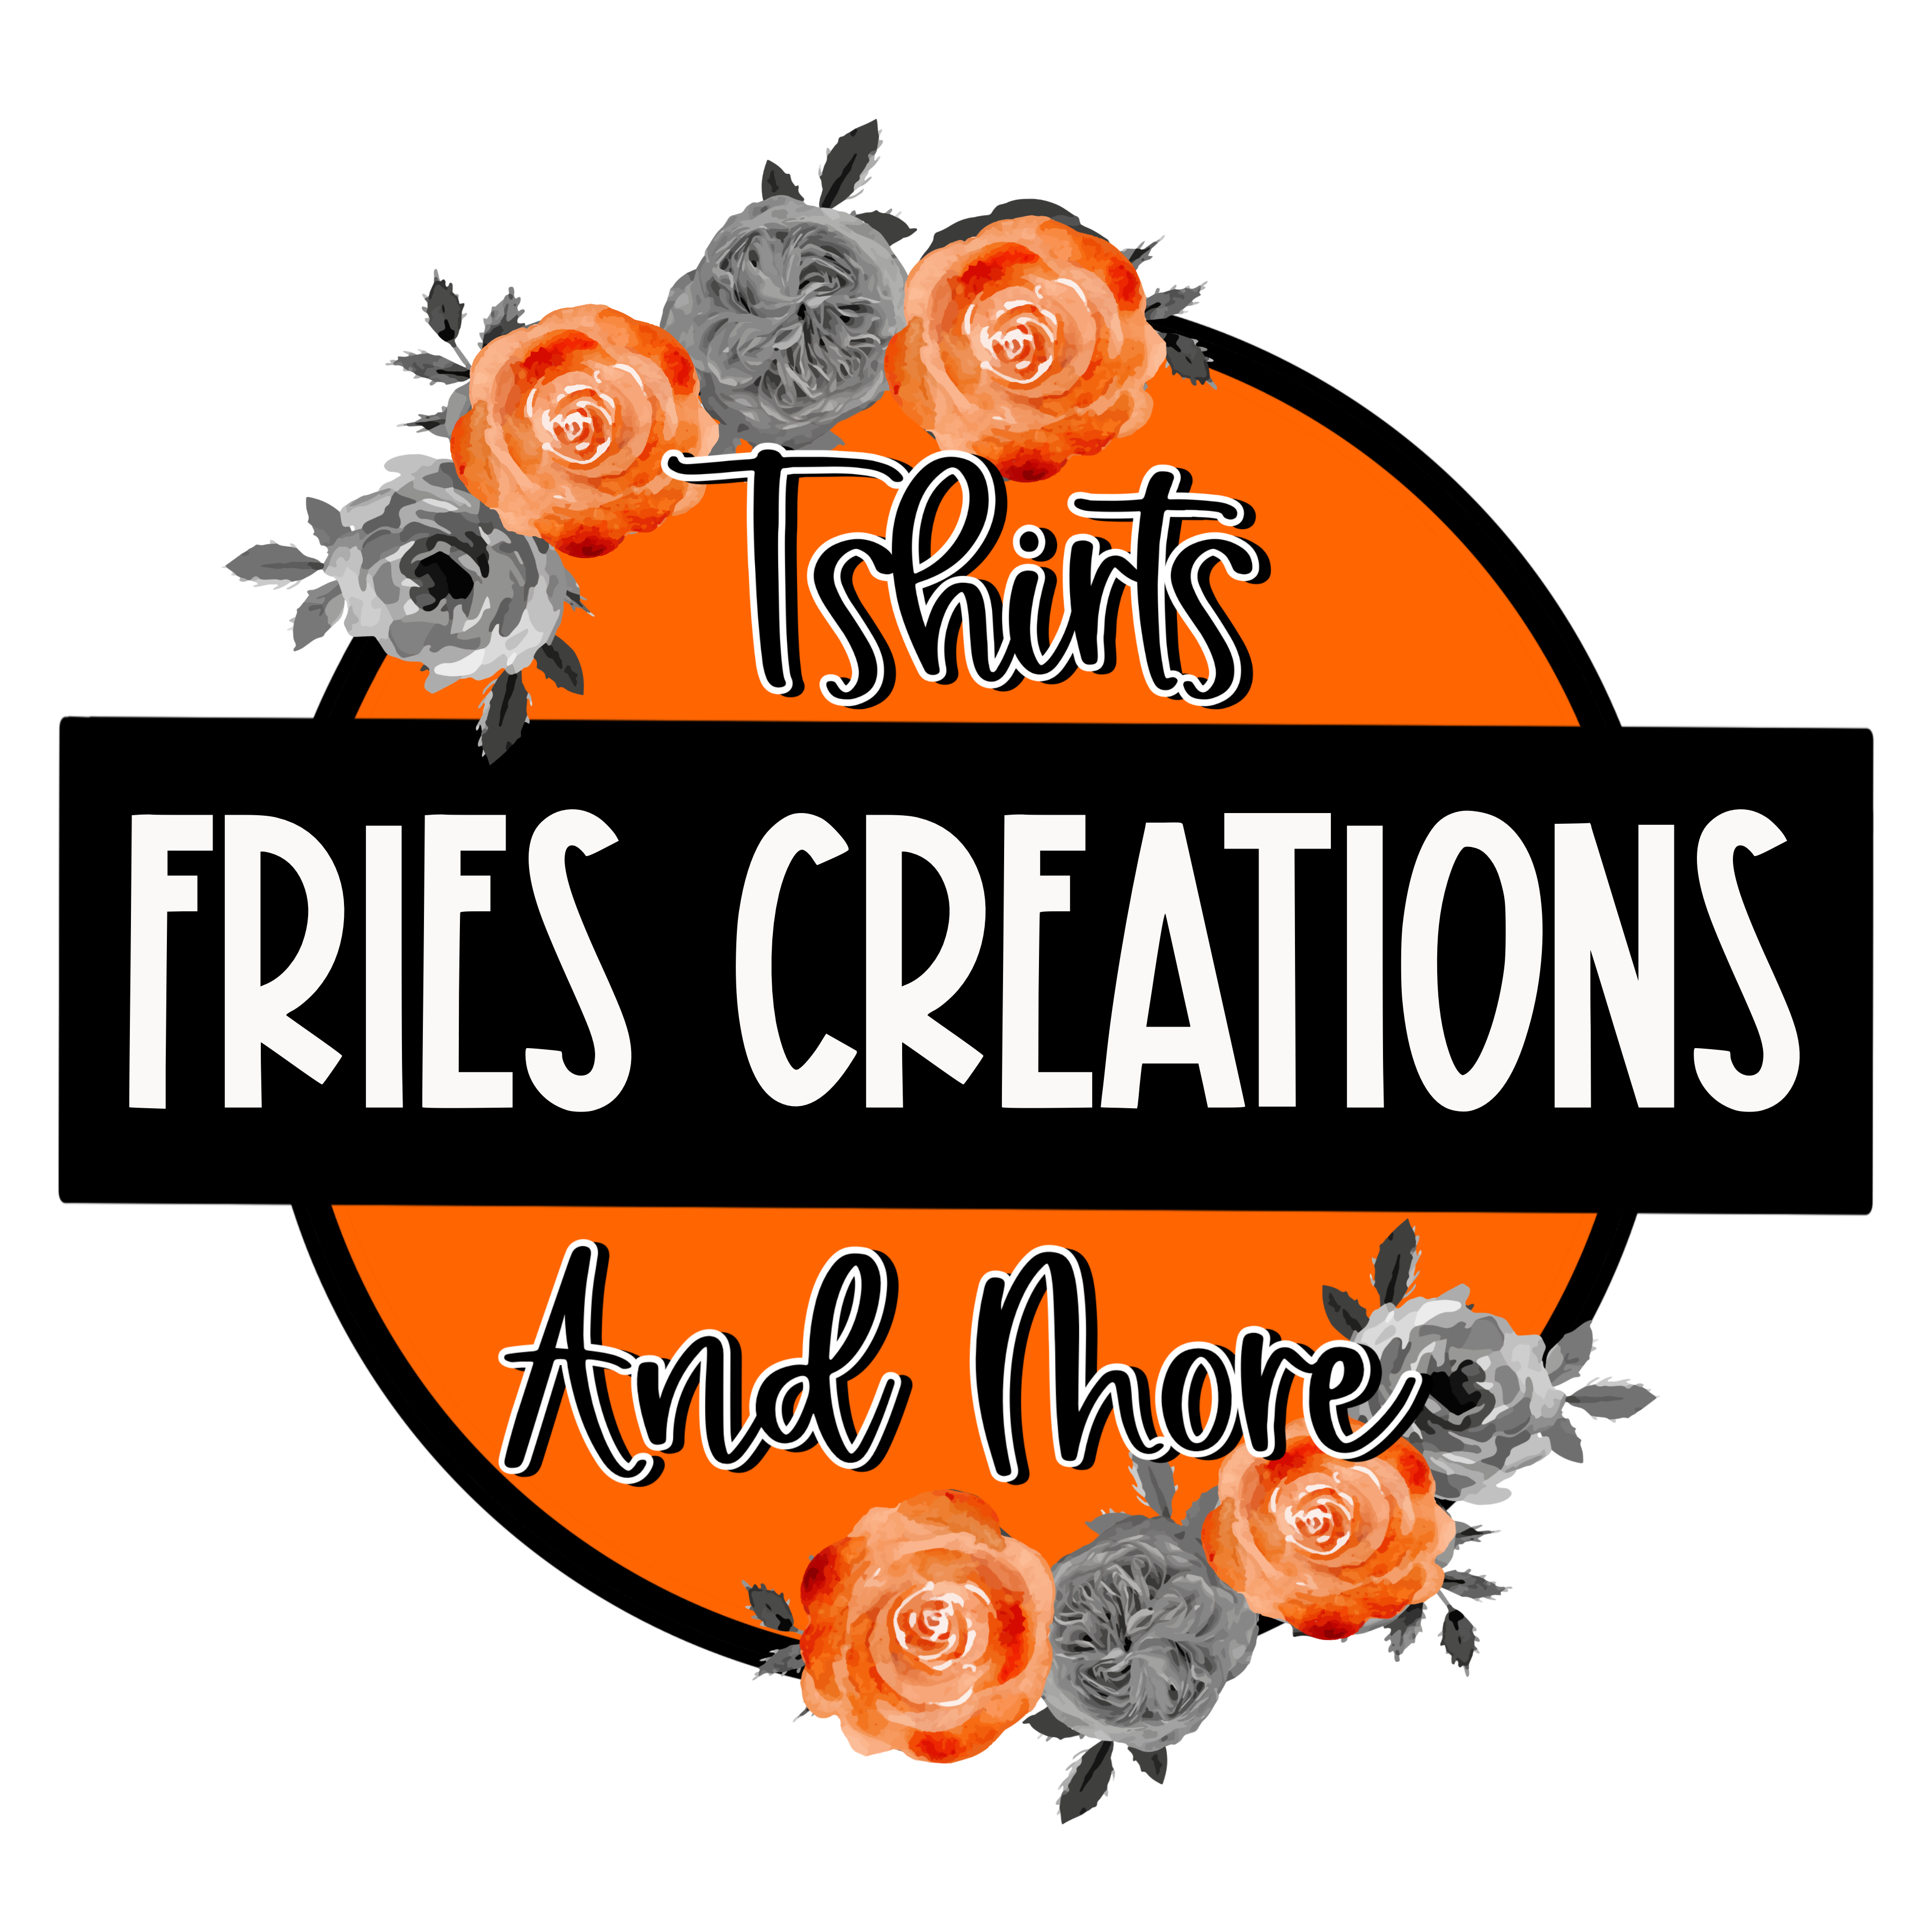 Fries Creations